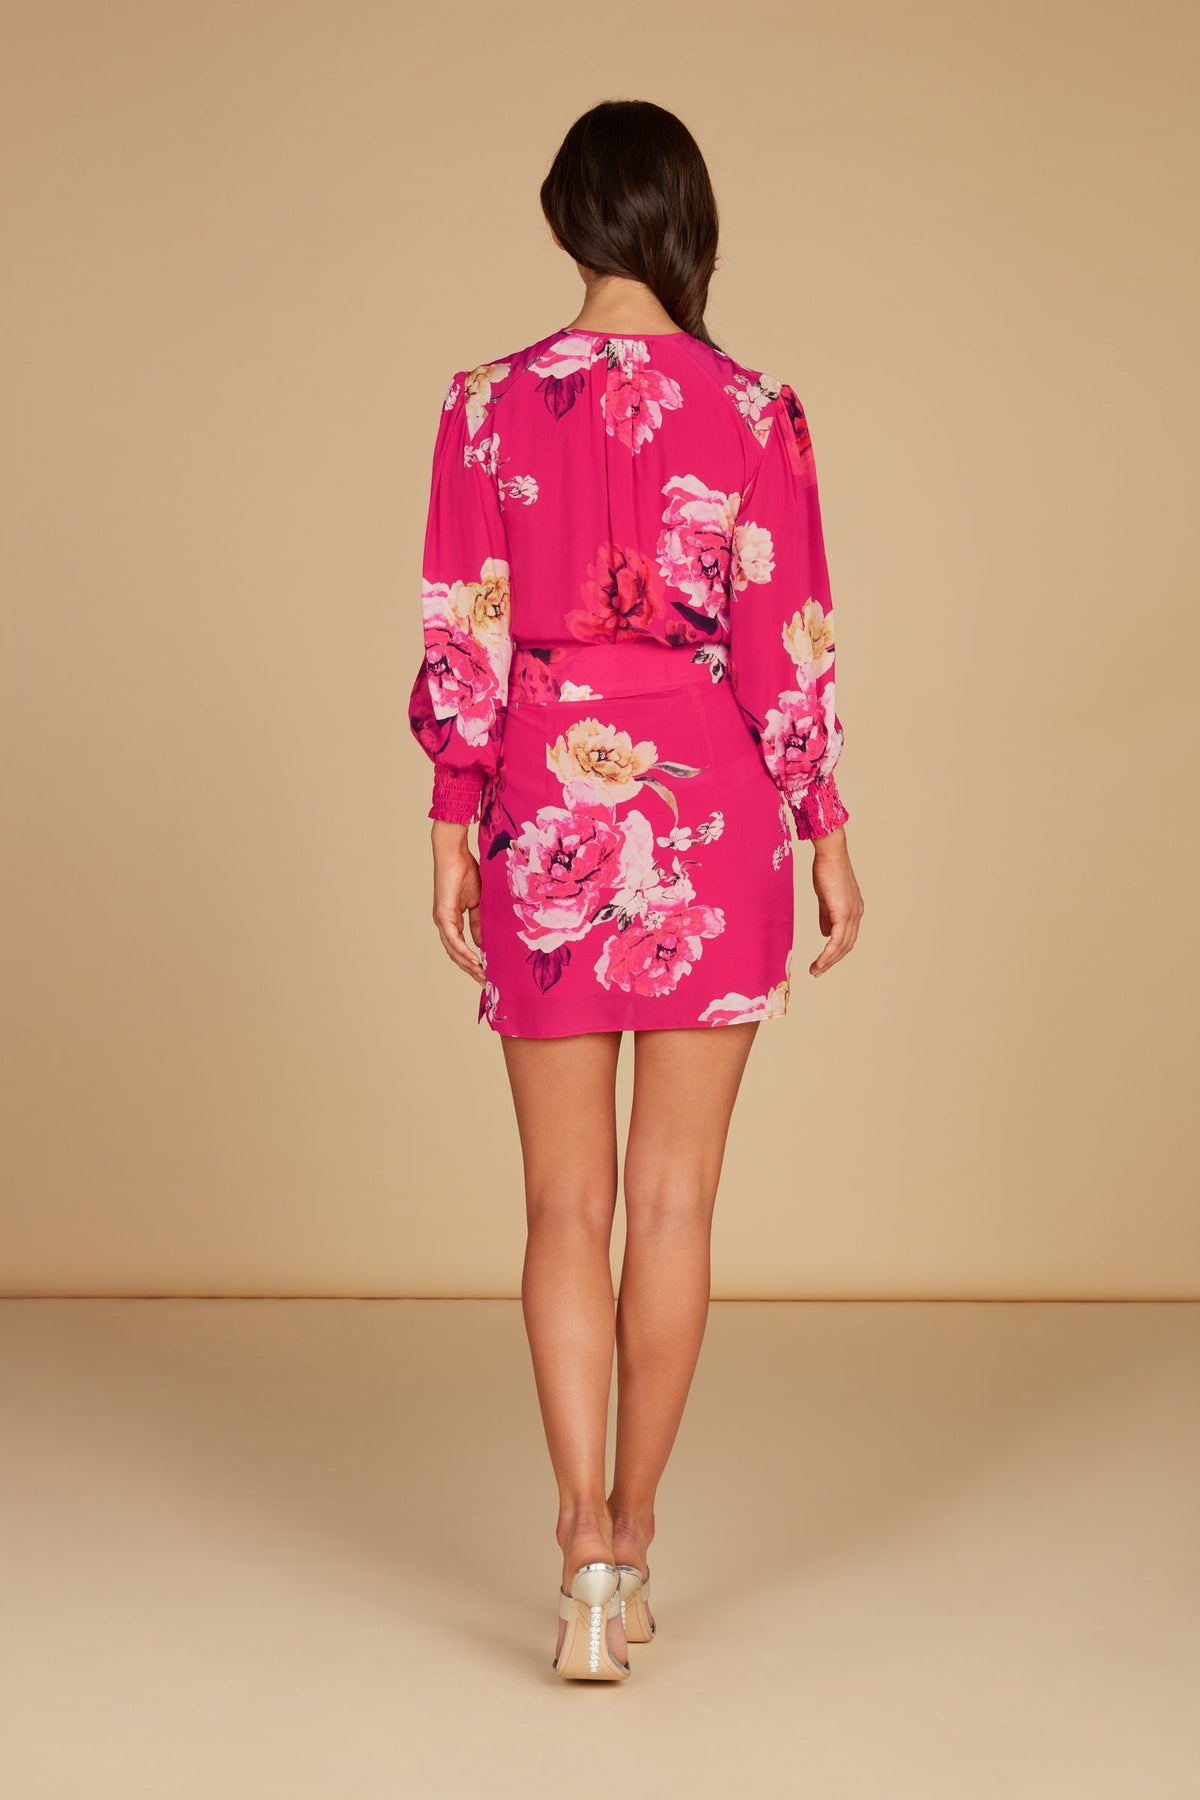 Lucia Draped Mini Dress in Hot Pink Floral